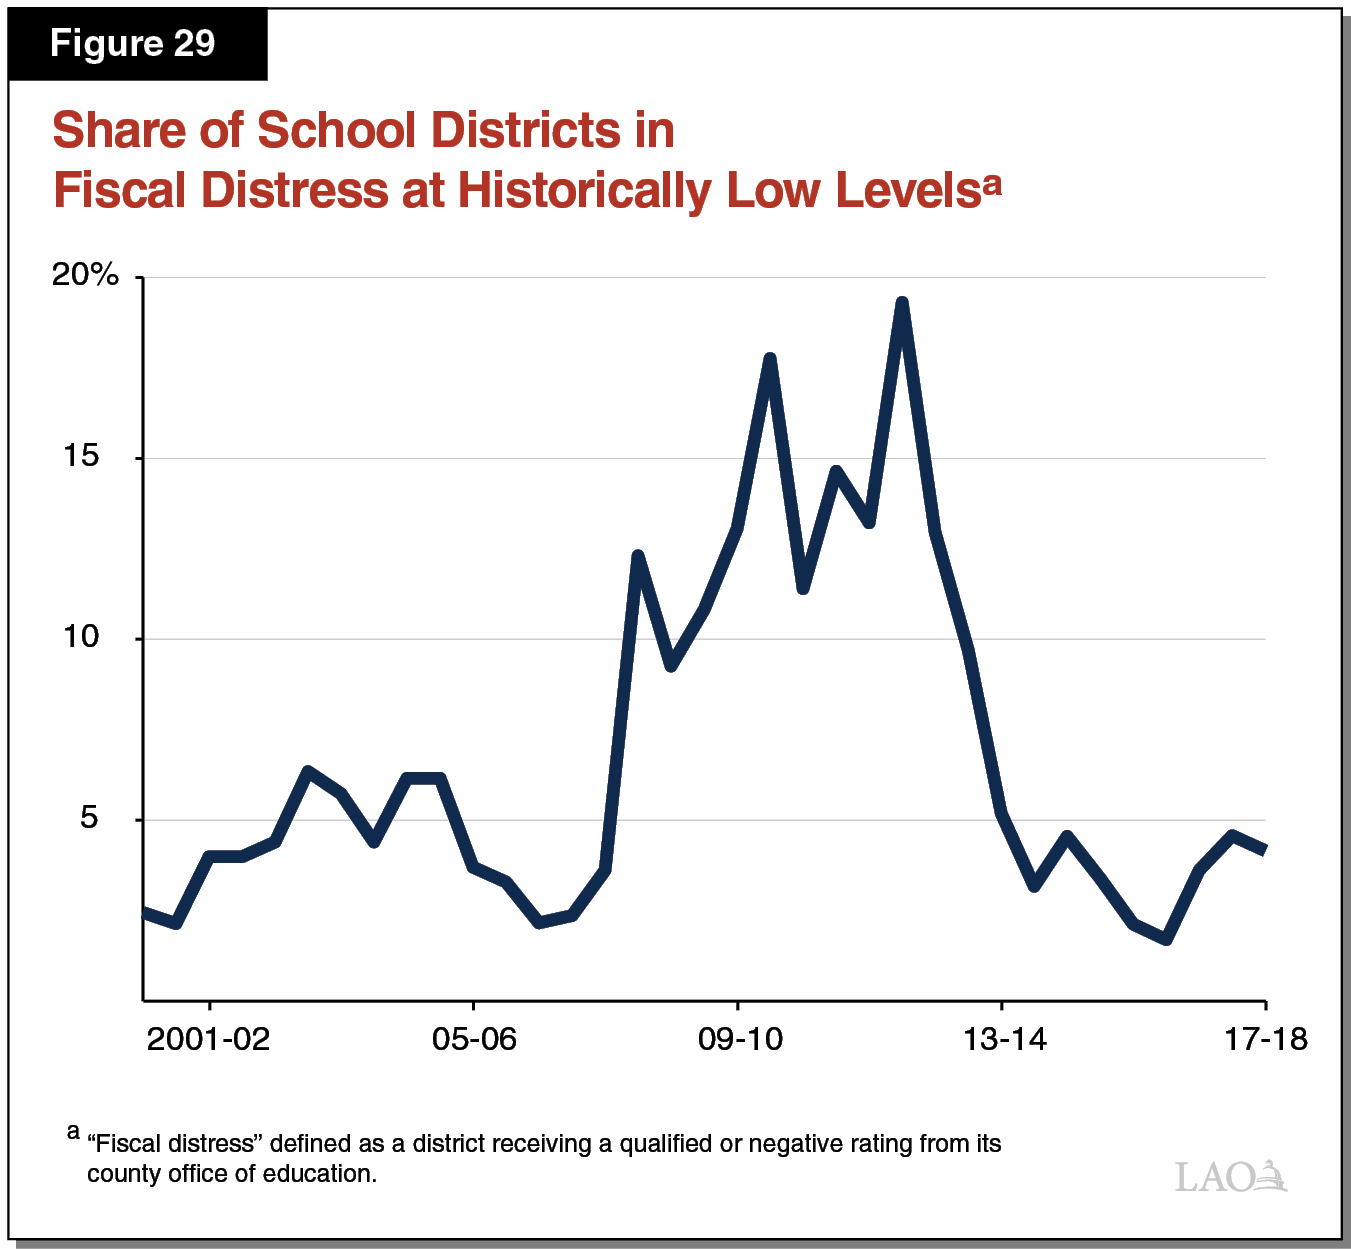 Figure 29 - Share of School Districts in Fiscal Distress at Historically Low Levels